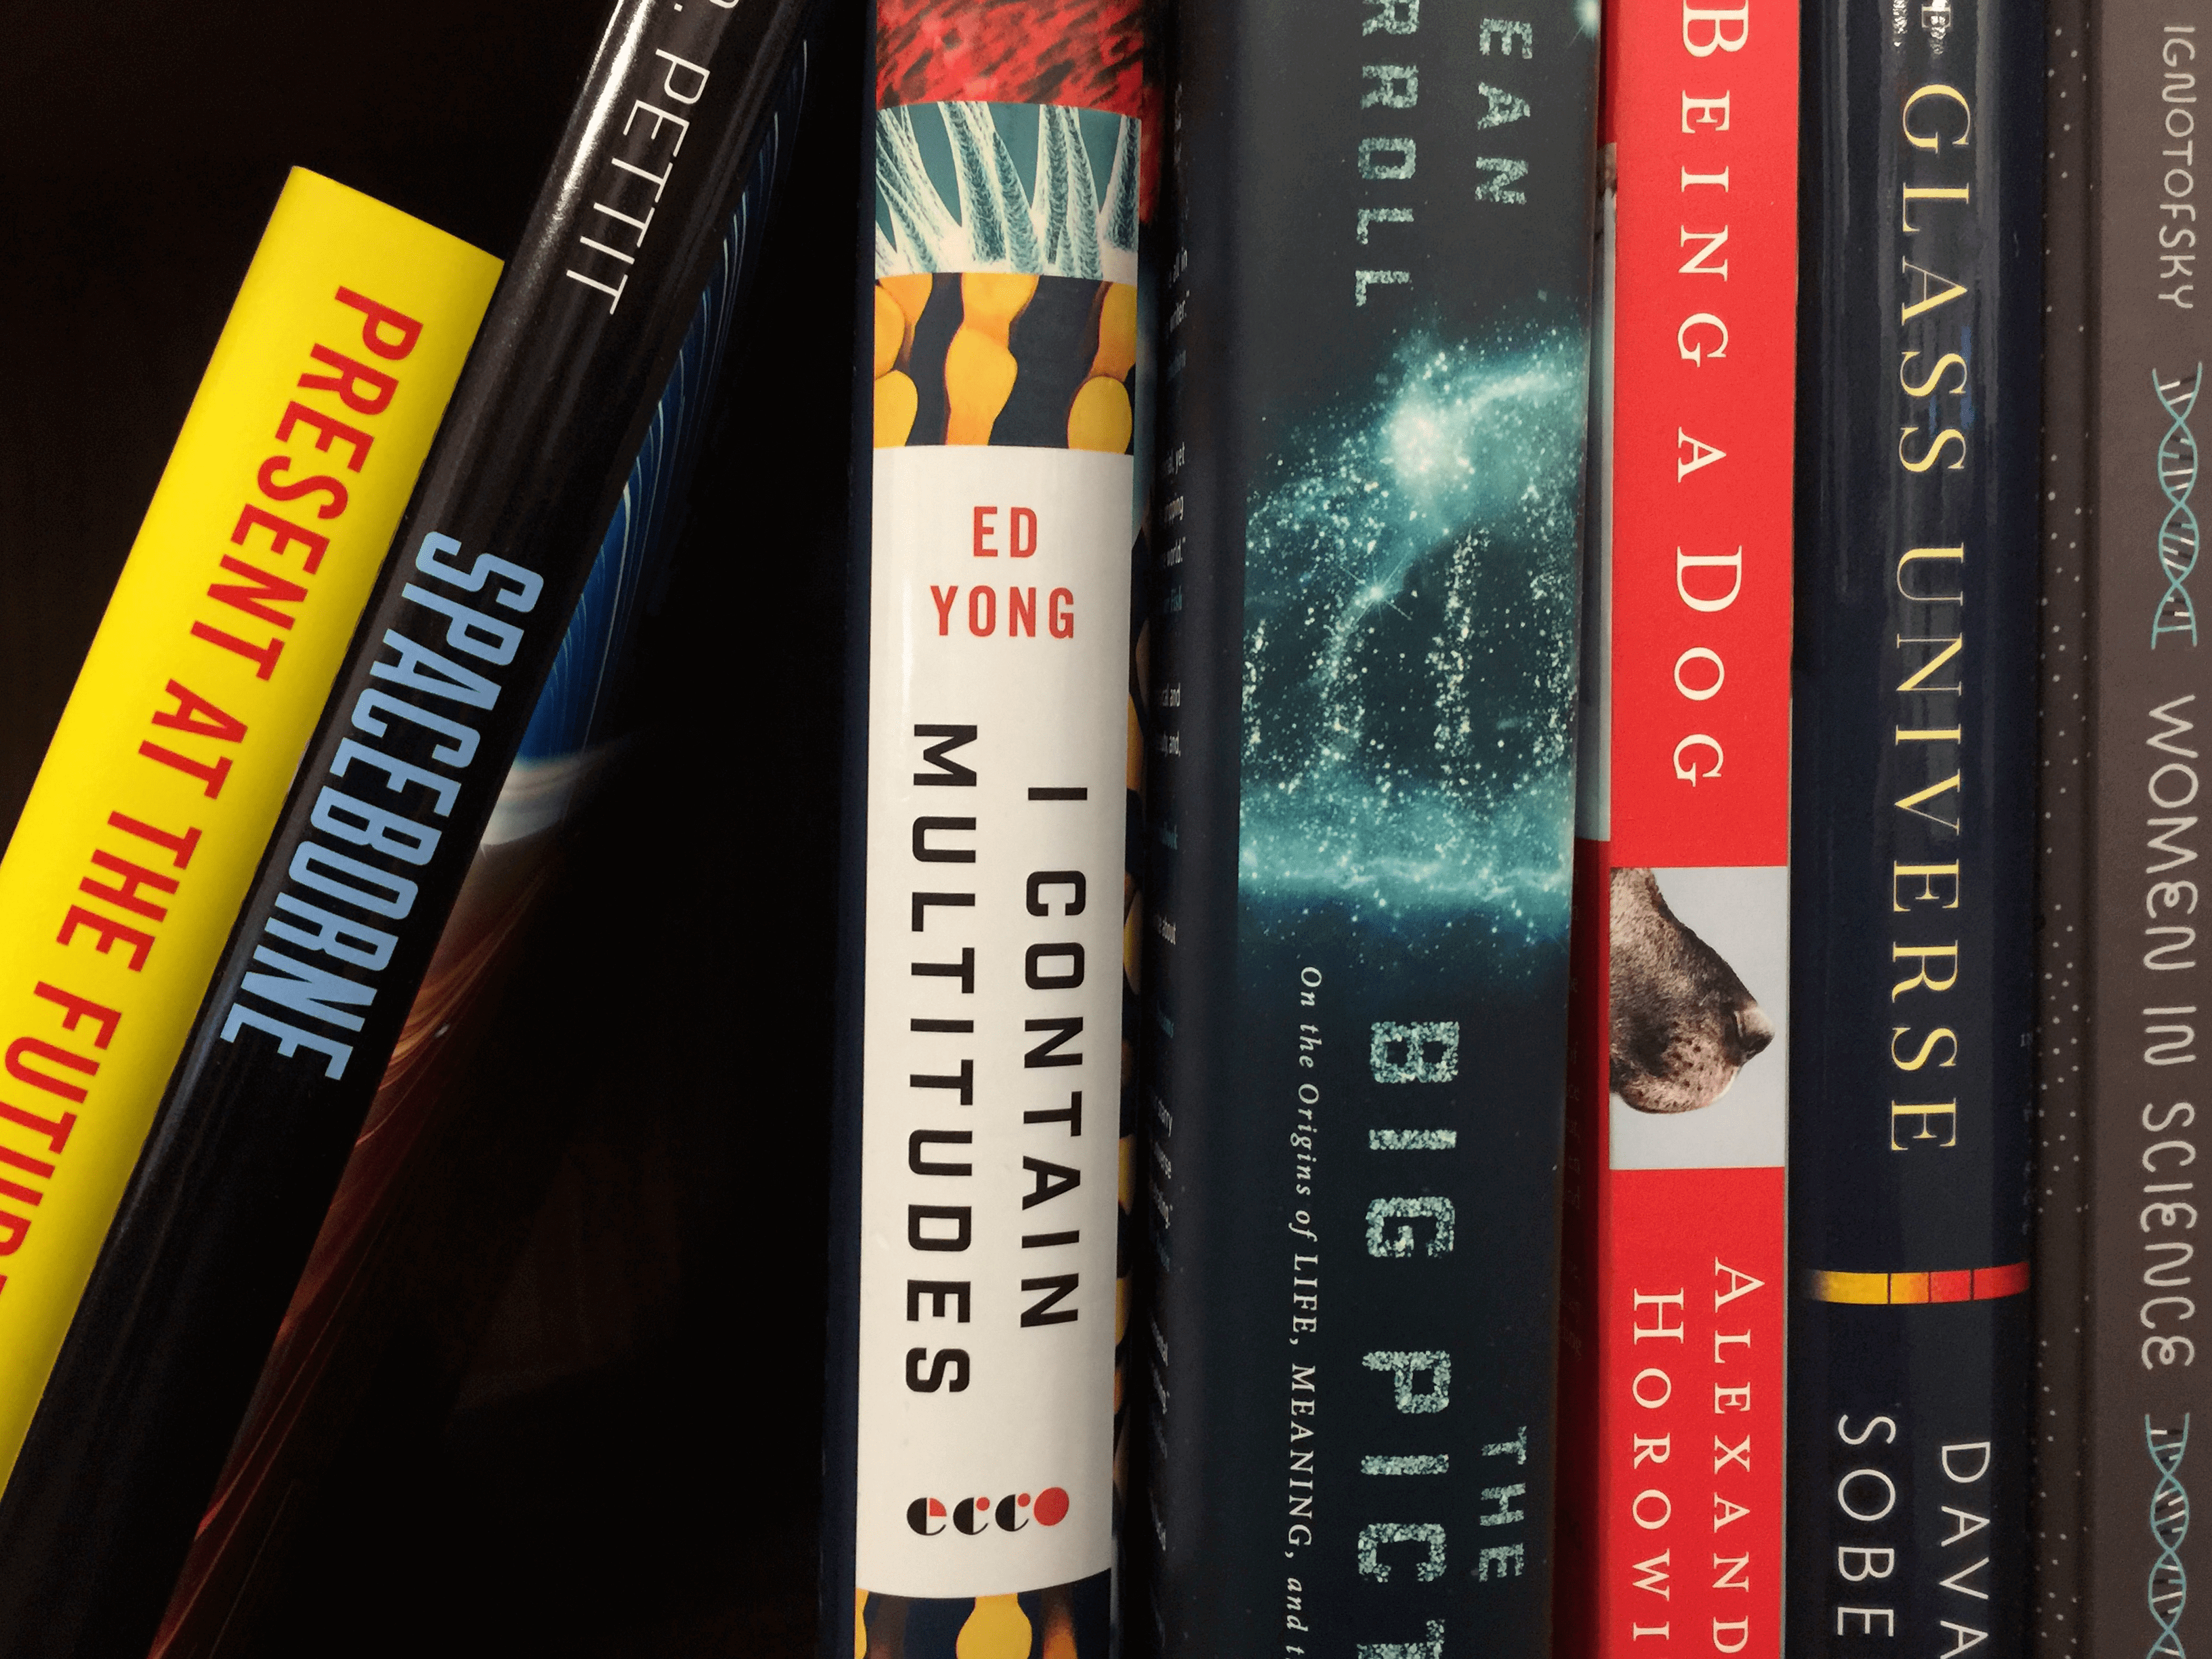 The Best Science Books Of 2016